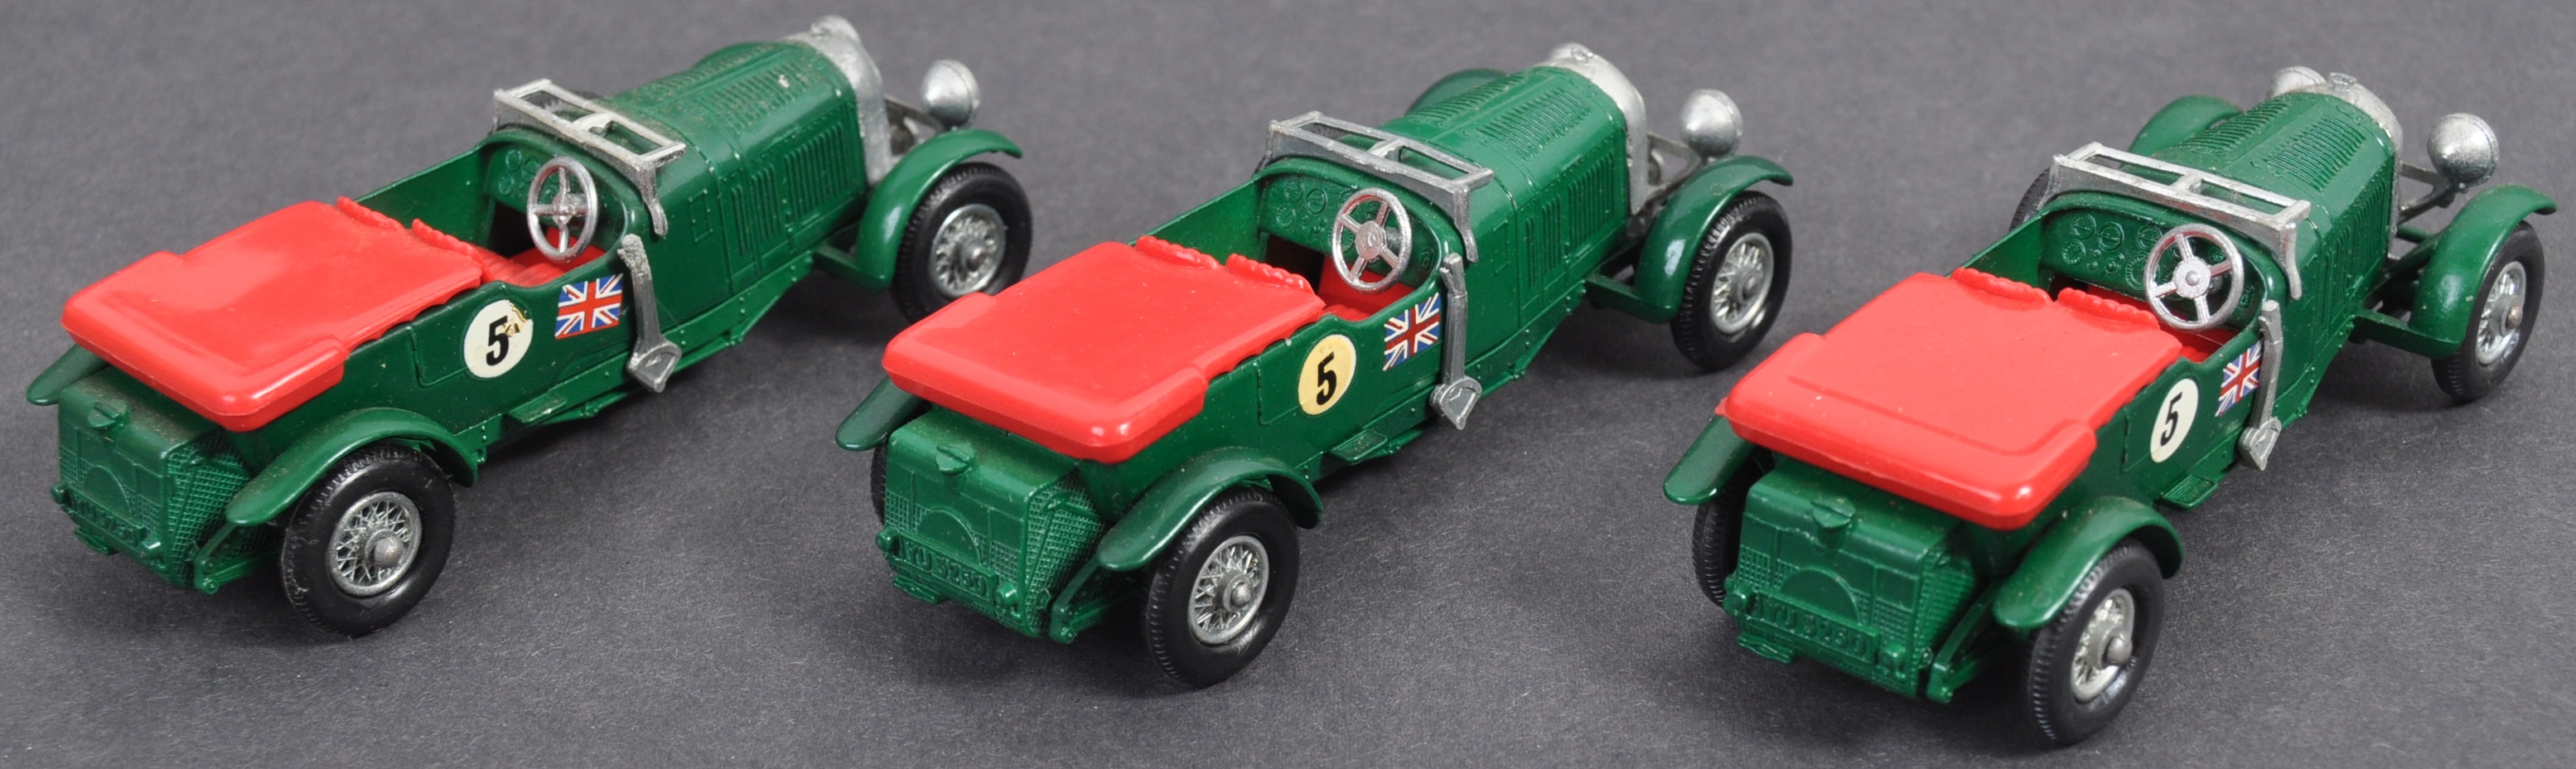 MATCHBOX MODELS OF YESTERYEAR - 1929 BENTLEY COLLECTION - Image 5 of 6